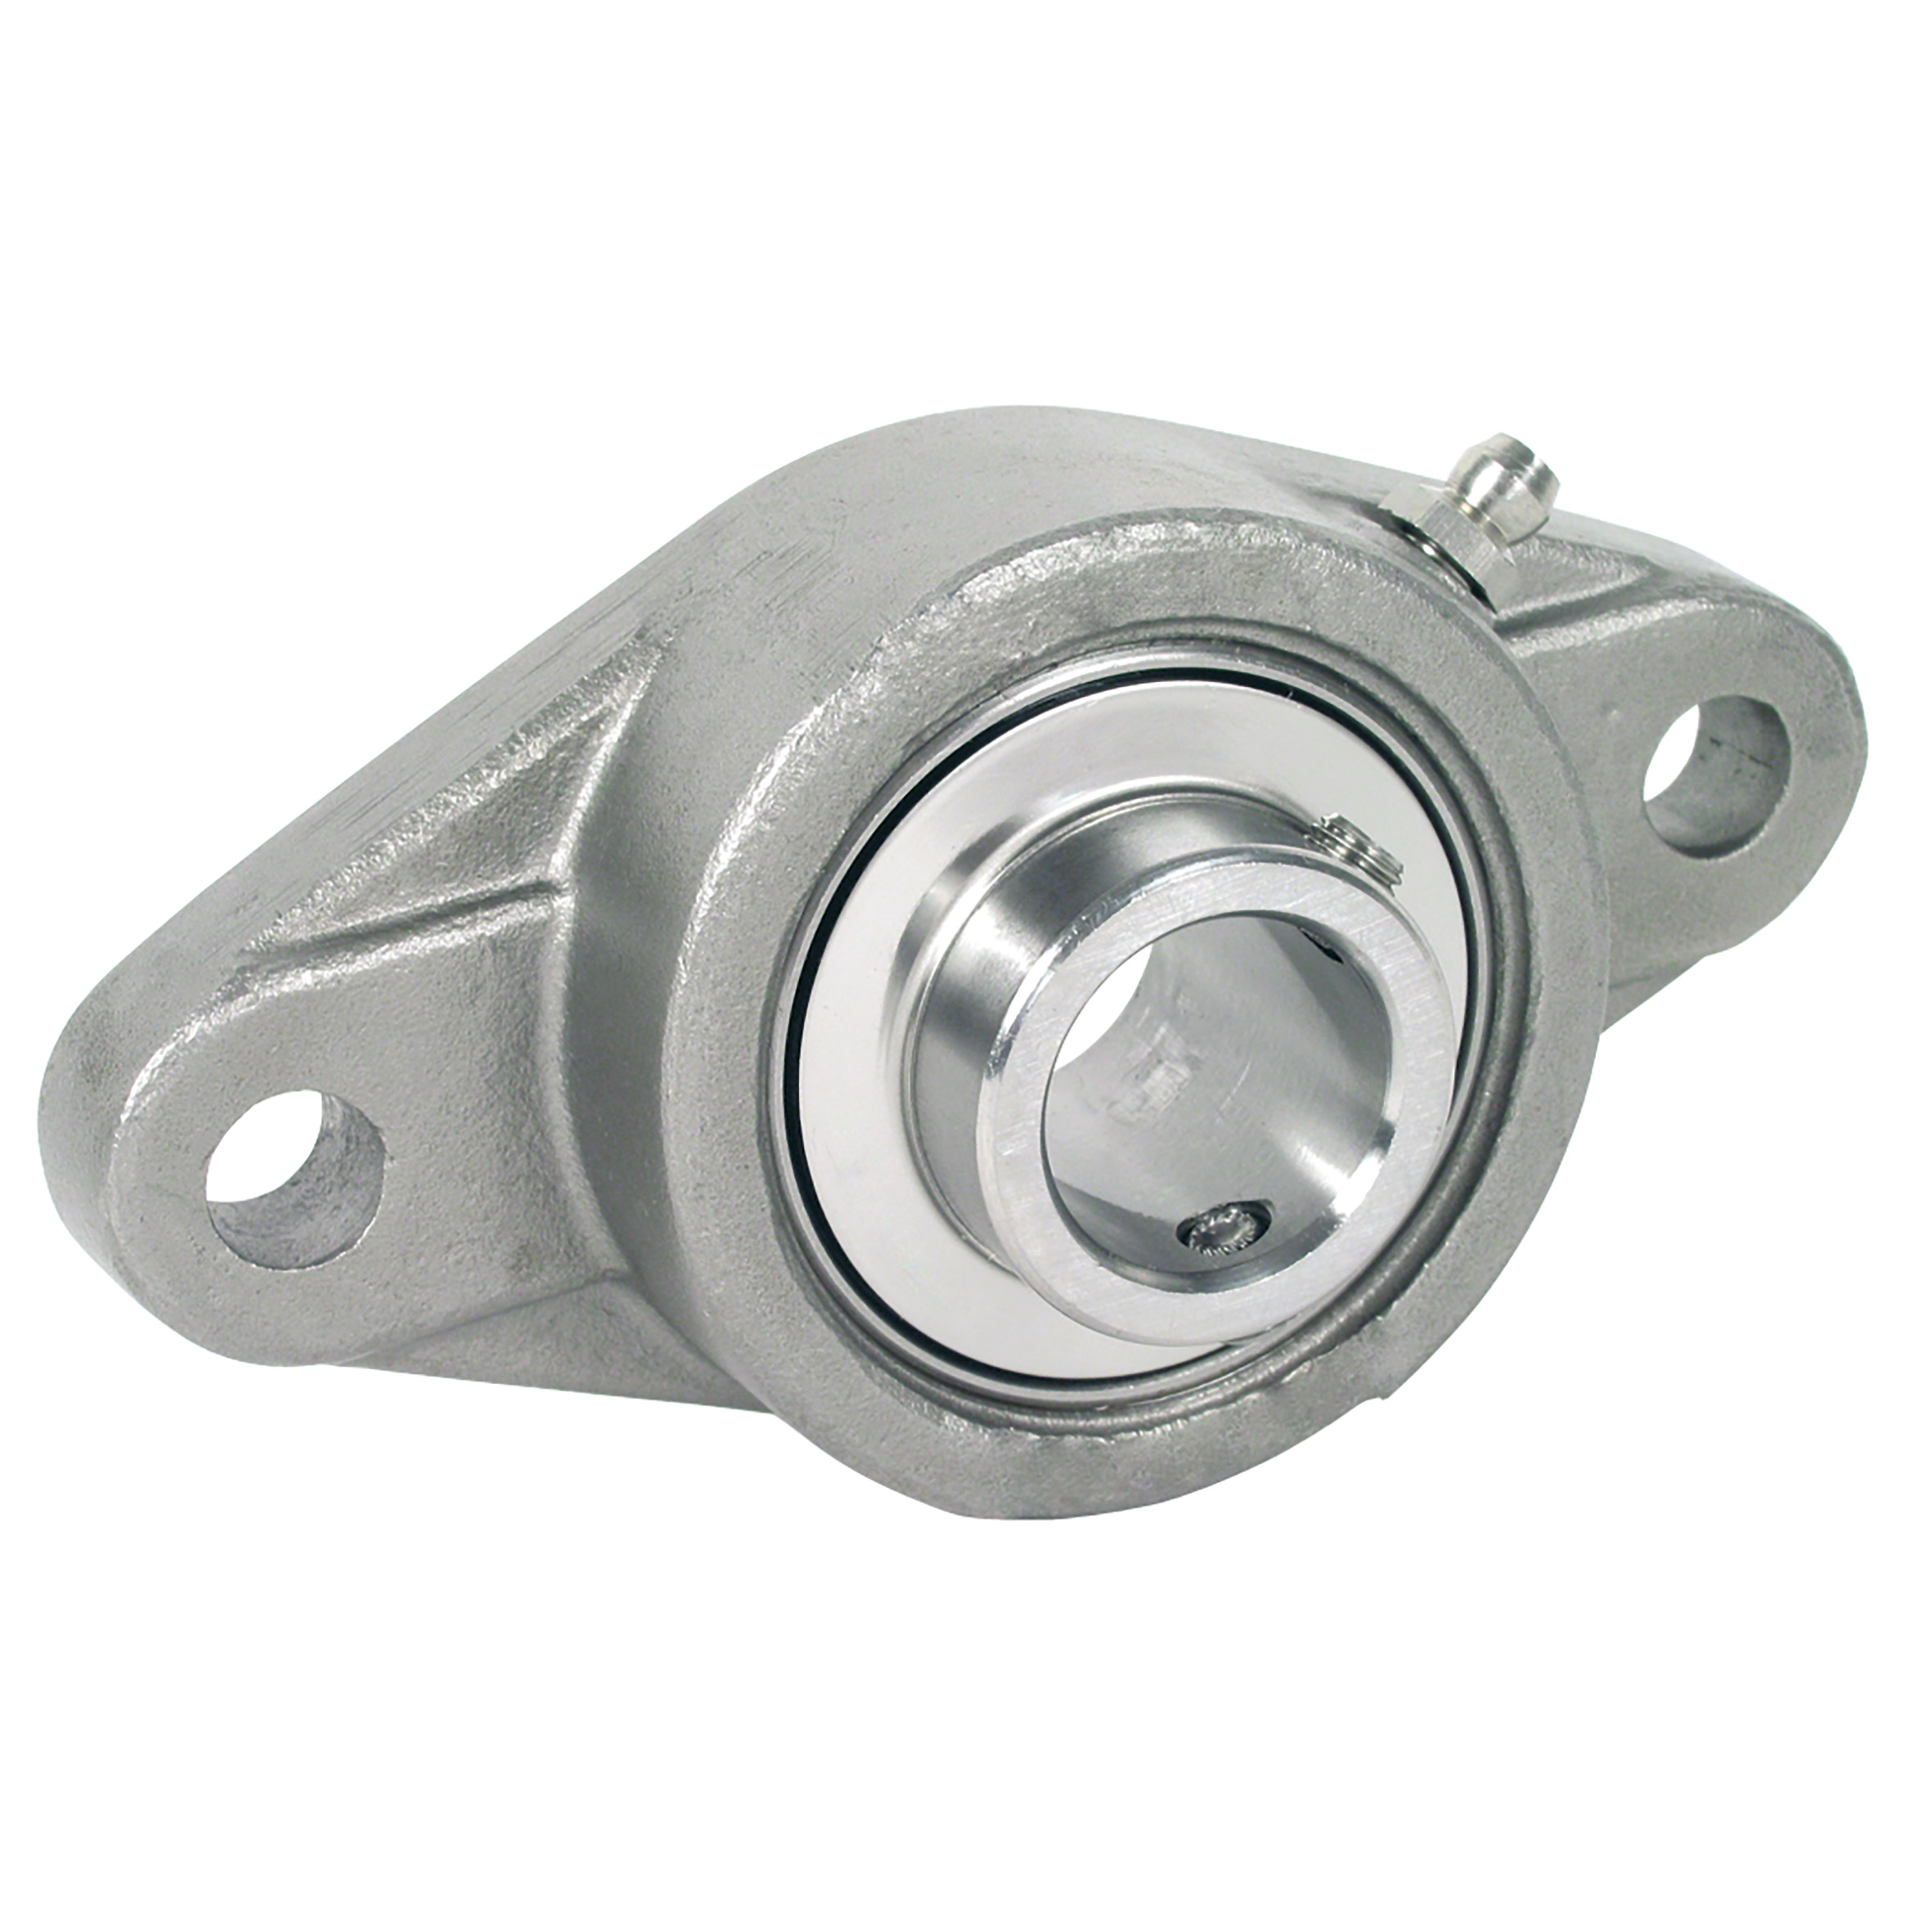 Stainless steel flanged bearing - Stainless steel - 2 fixing holes - 